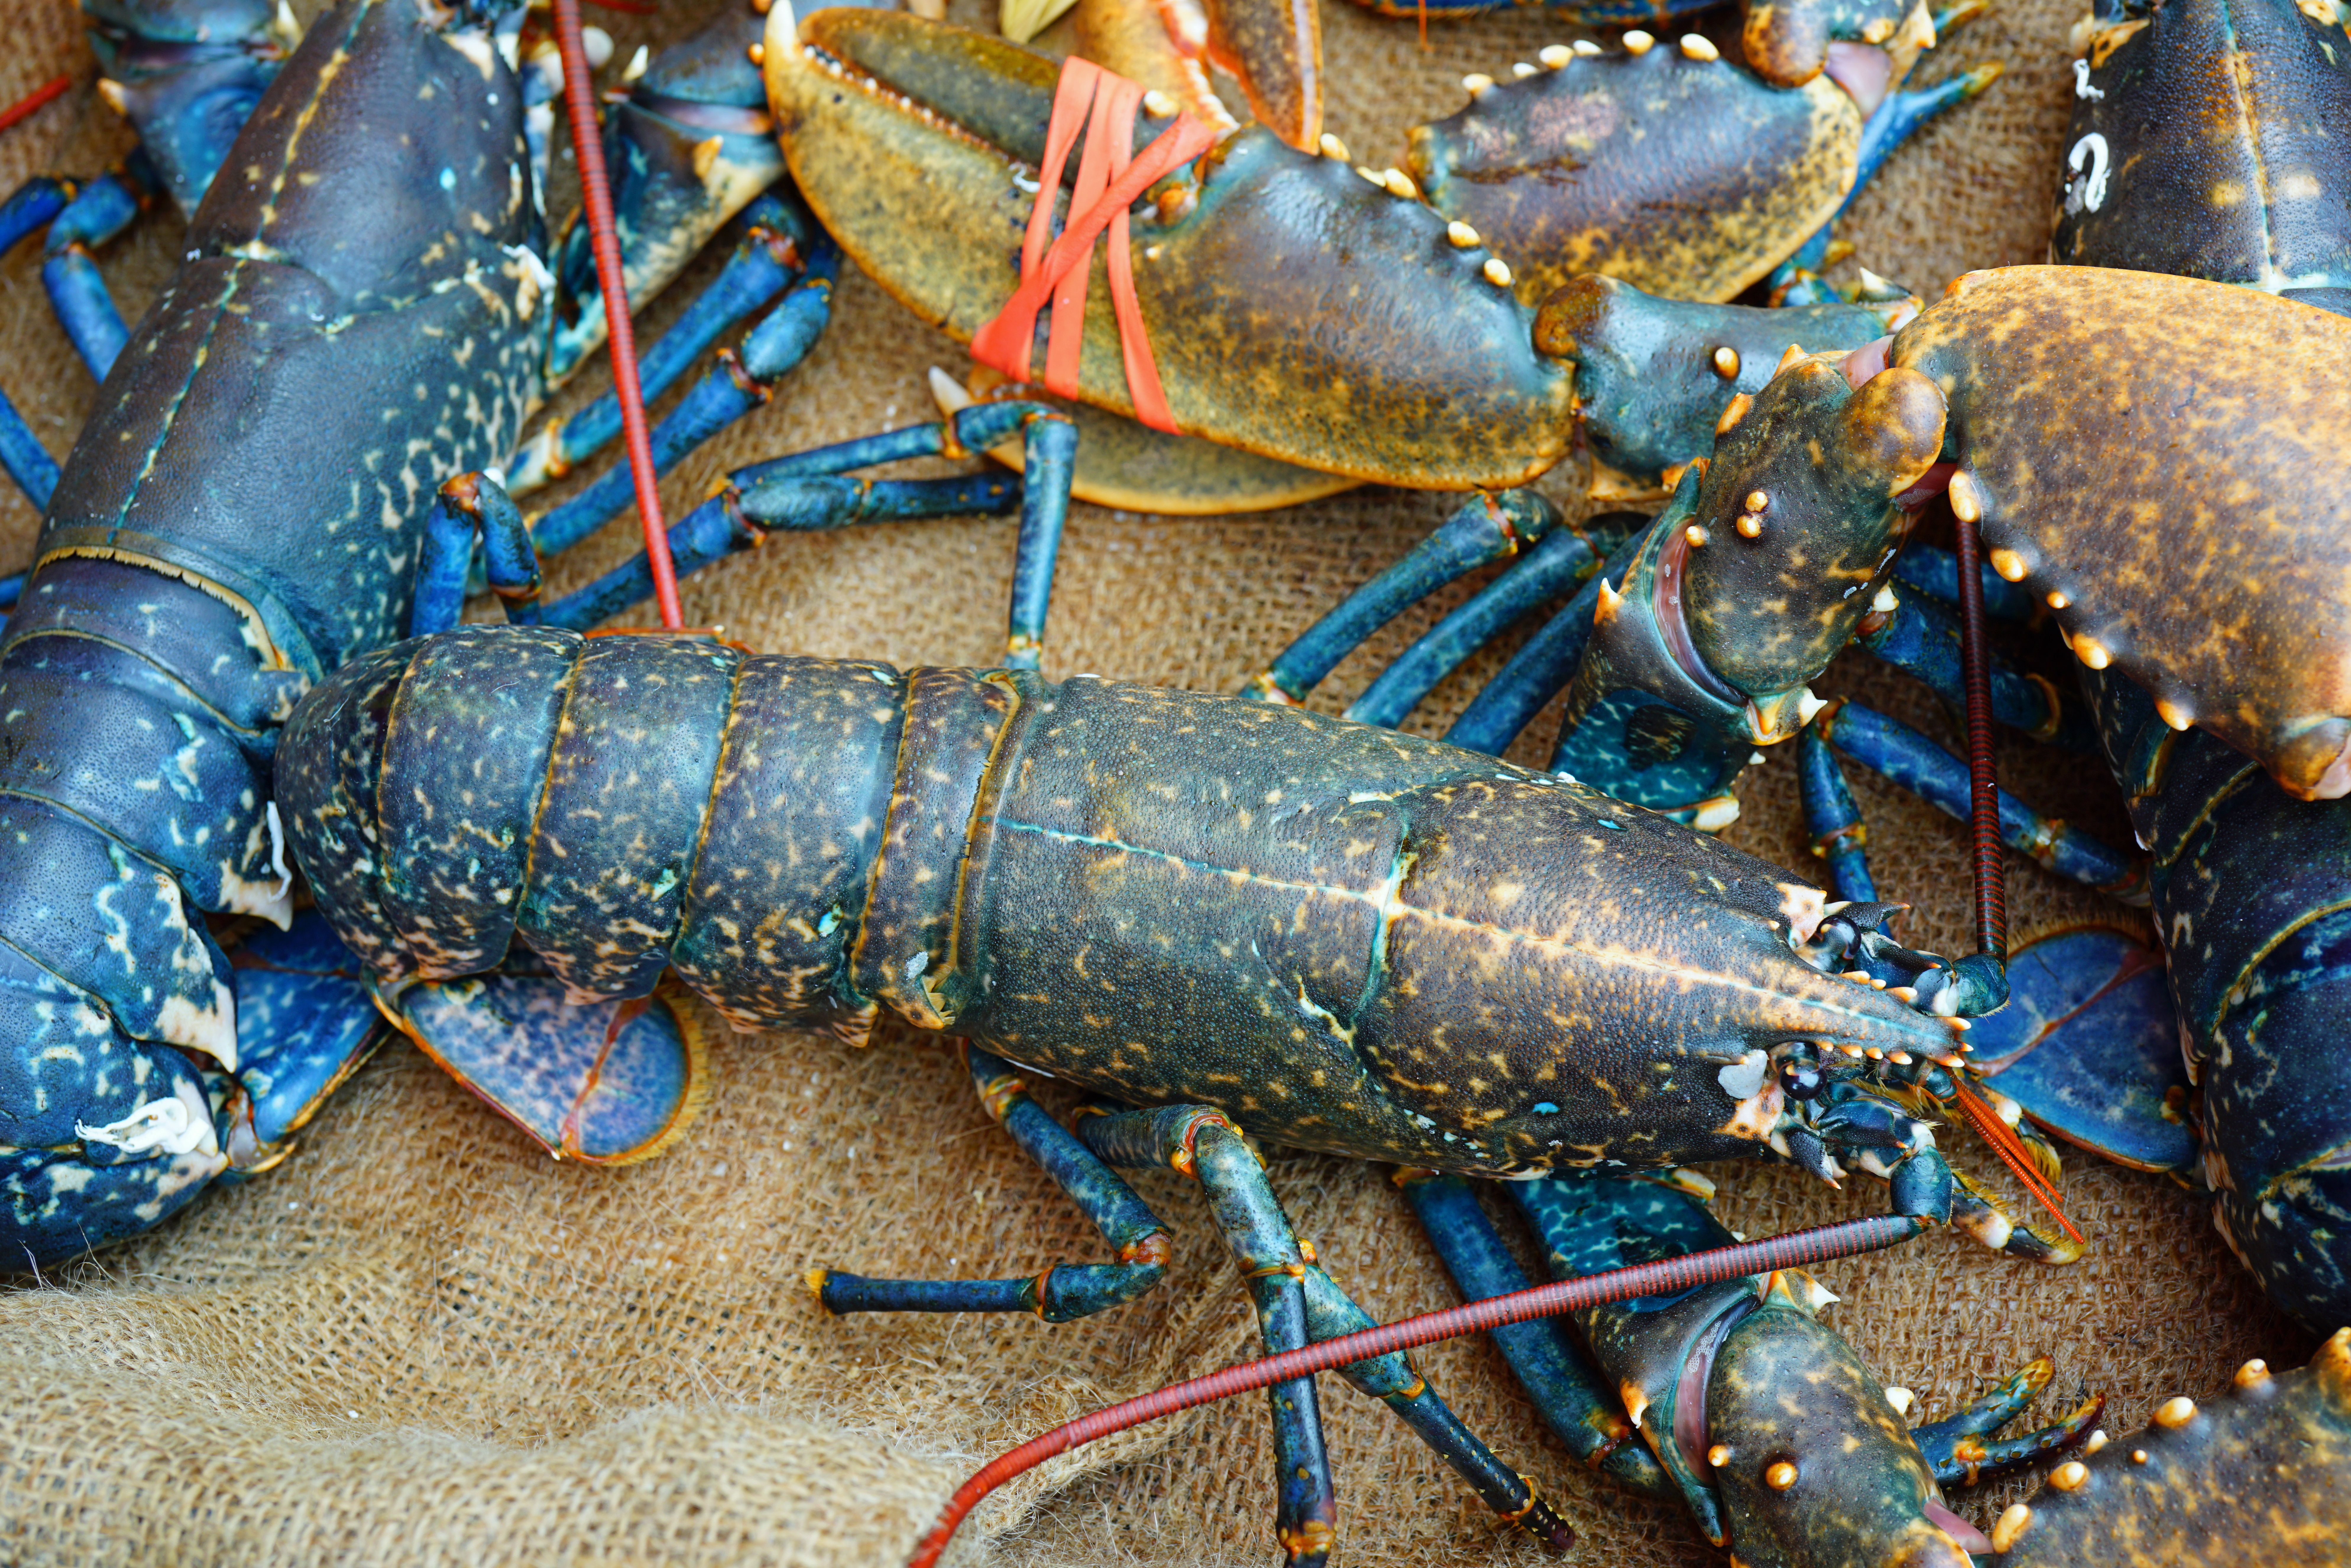 Where to Buy Lobster: Comparing Delivery vs. In-Store Options